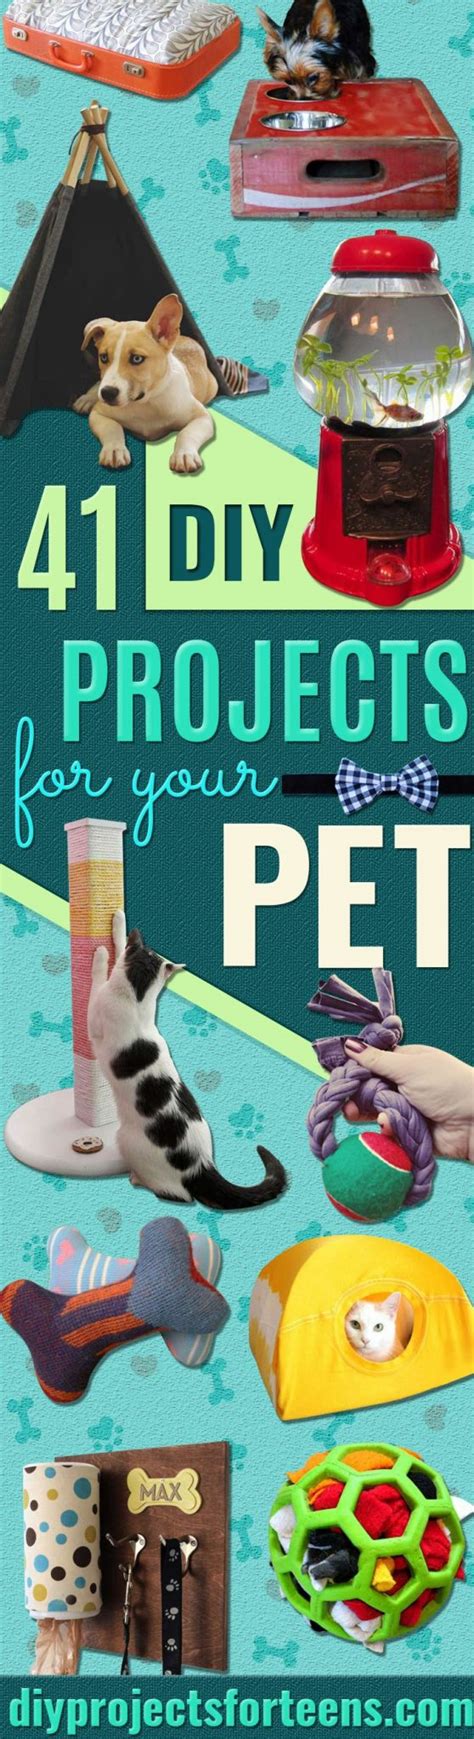 41 Crafty Diy Projects For Your Pet Diy Projects For Teens